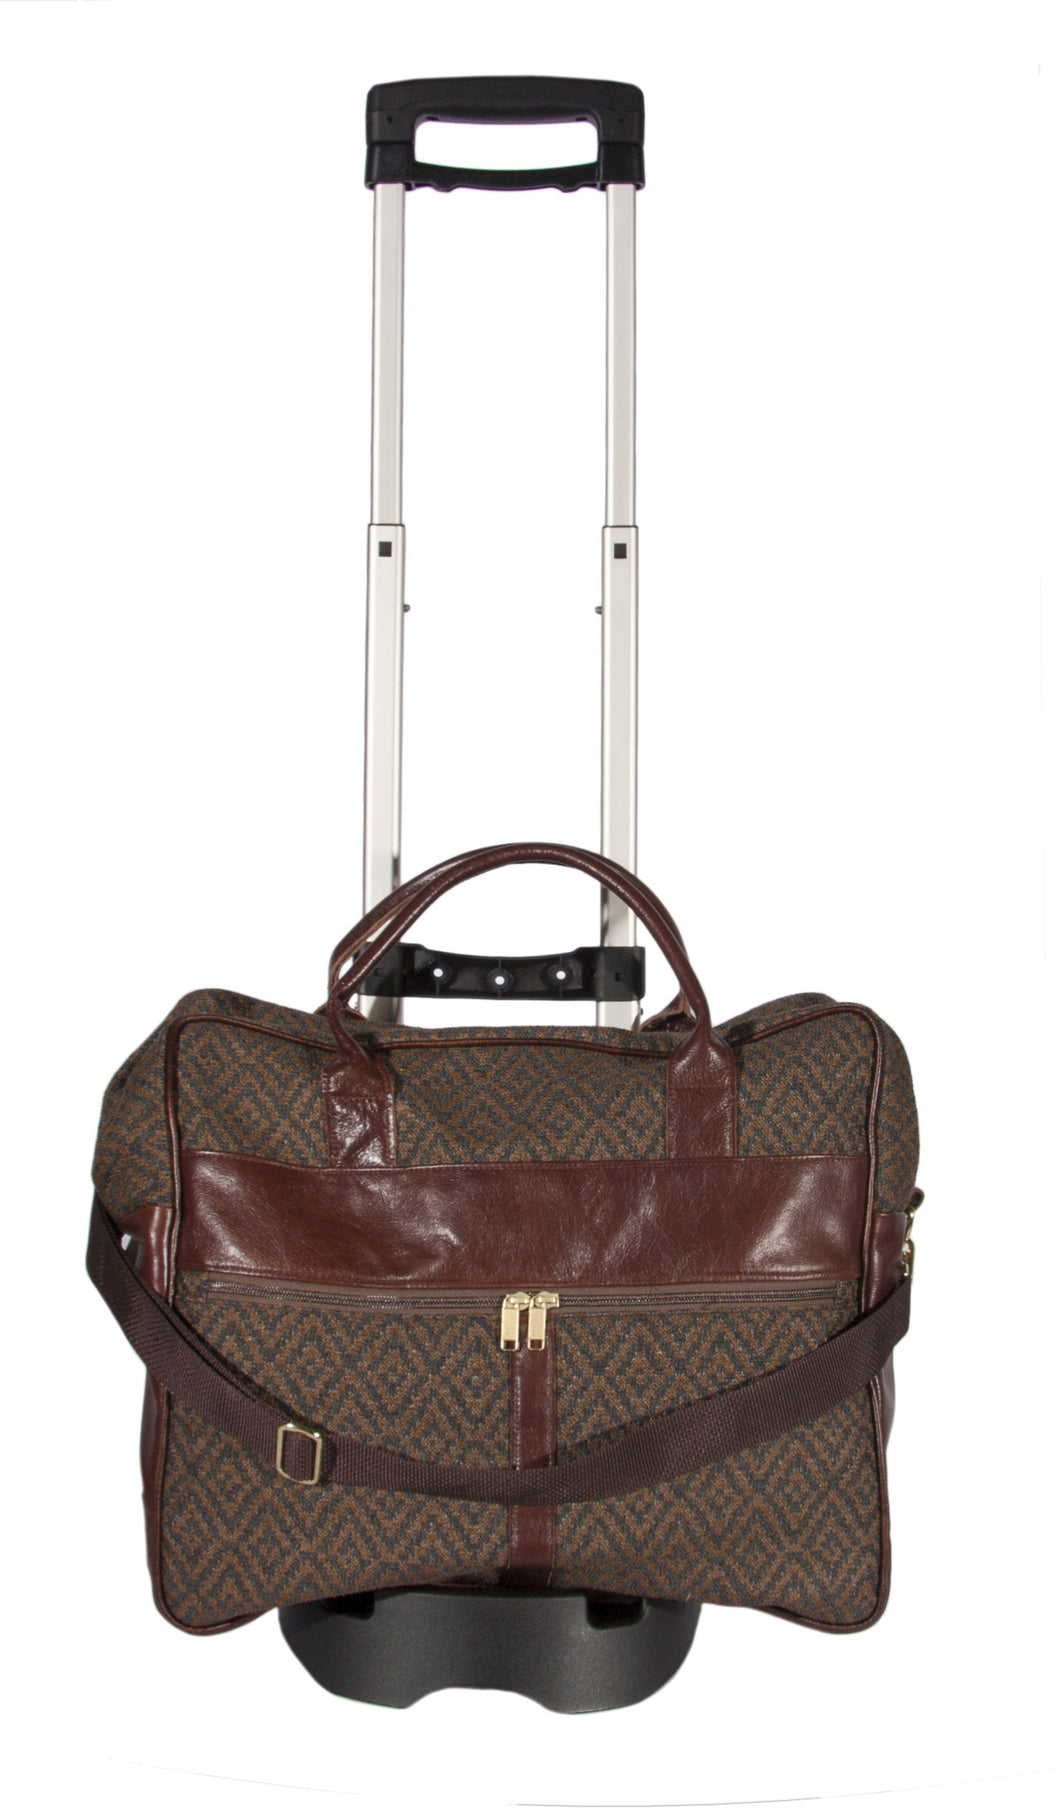 L1023B-3038 Grande Cargo Rioja Stone w Trolley Cart trimmed w Authentic Leather. Spacious Weekender Tote Double Straps and Adjustable Shoulder Strap. Part of the Unbridled Passion, Travel and Cosmetic Bags Collection 16